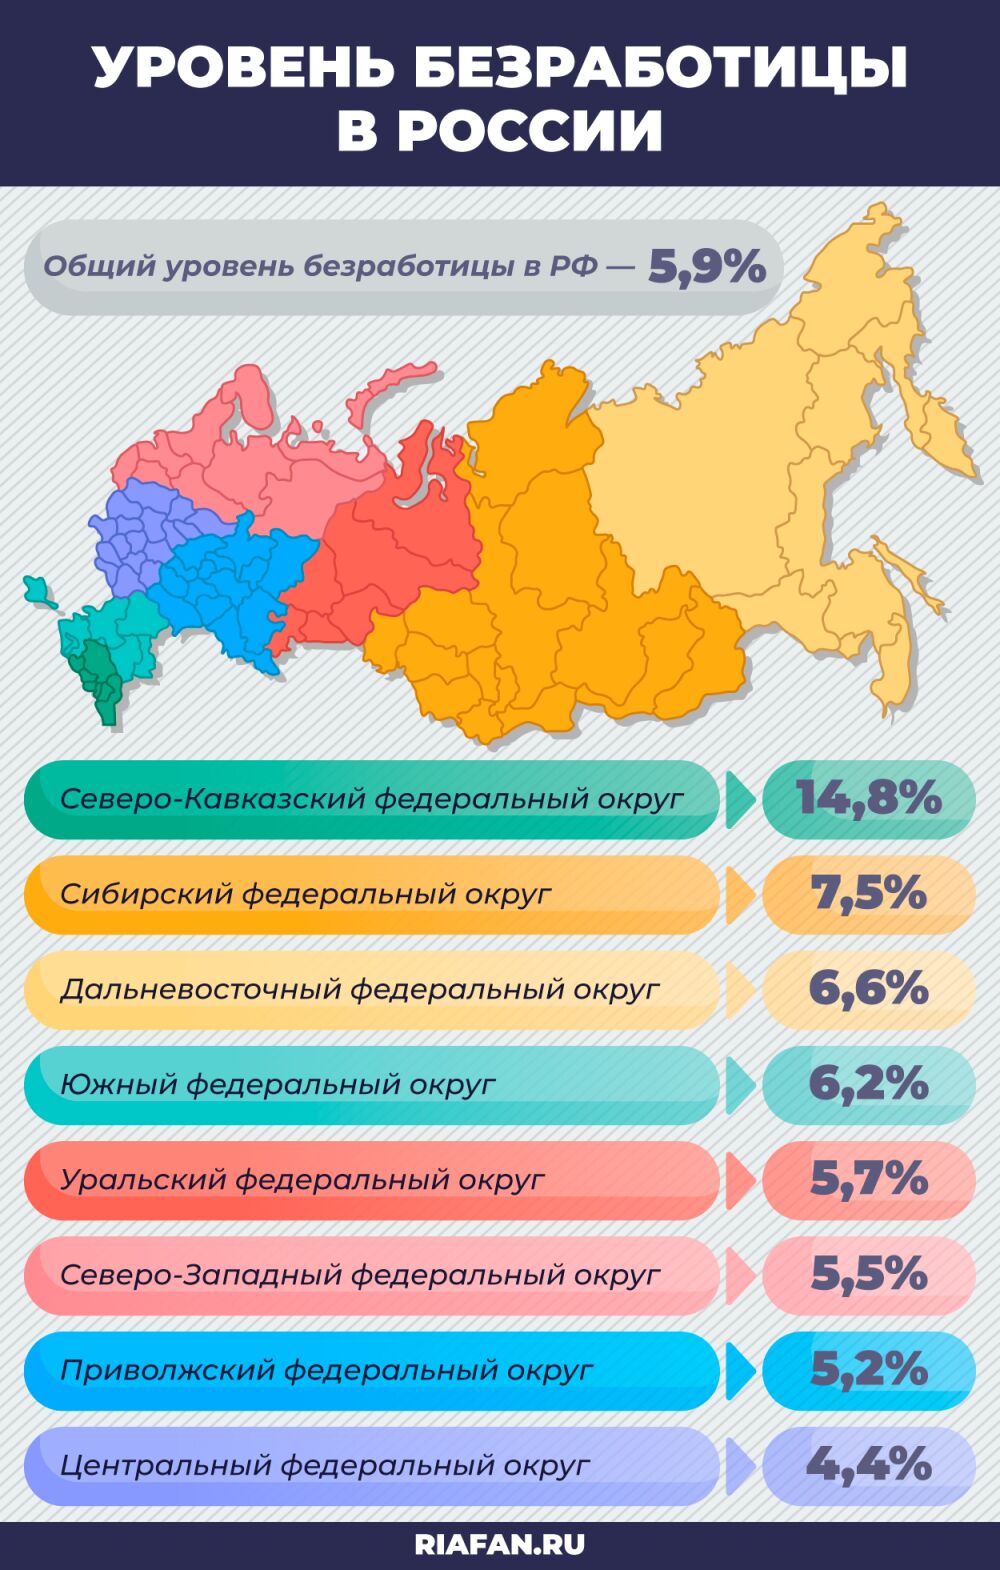 The regions of the Russian Federation with the highest and lowest unemployment are named